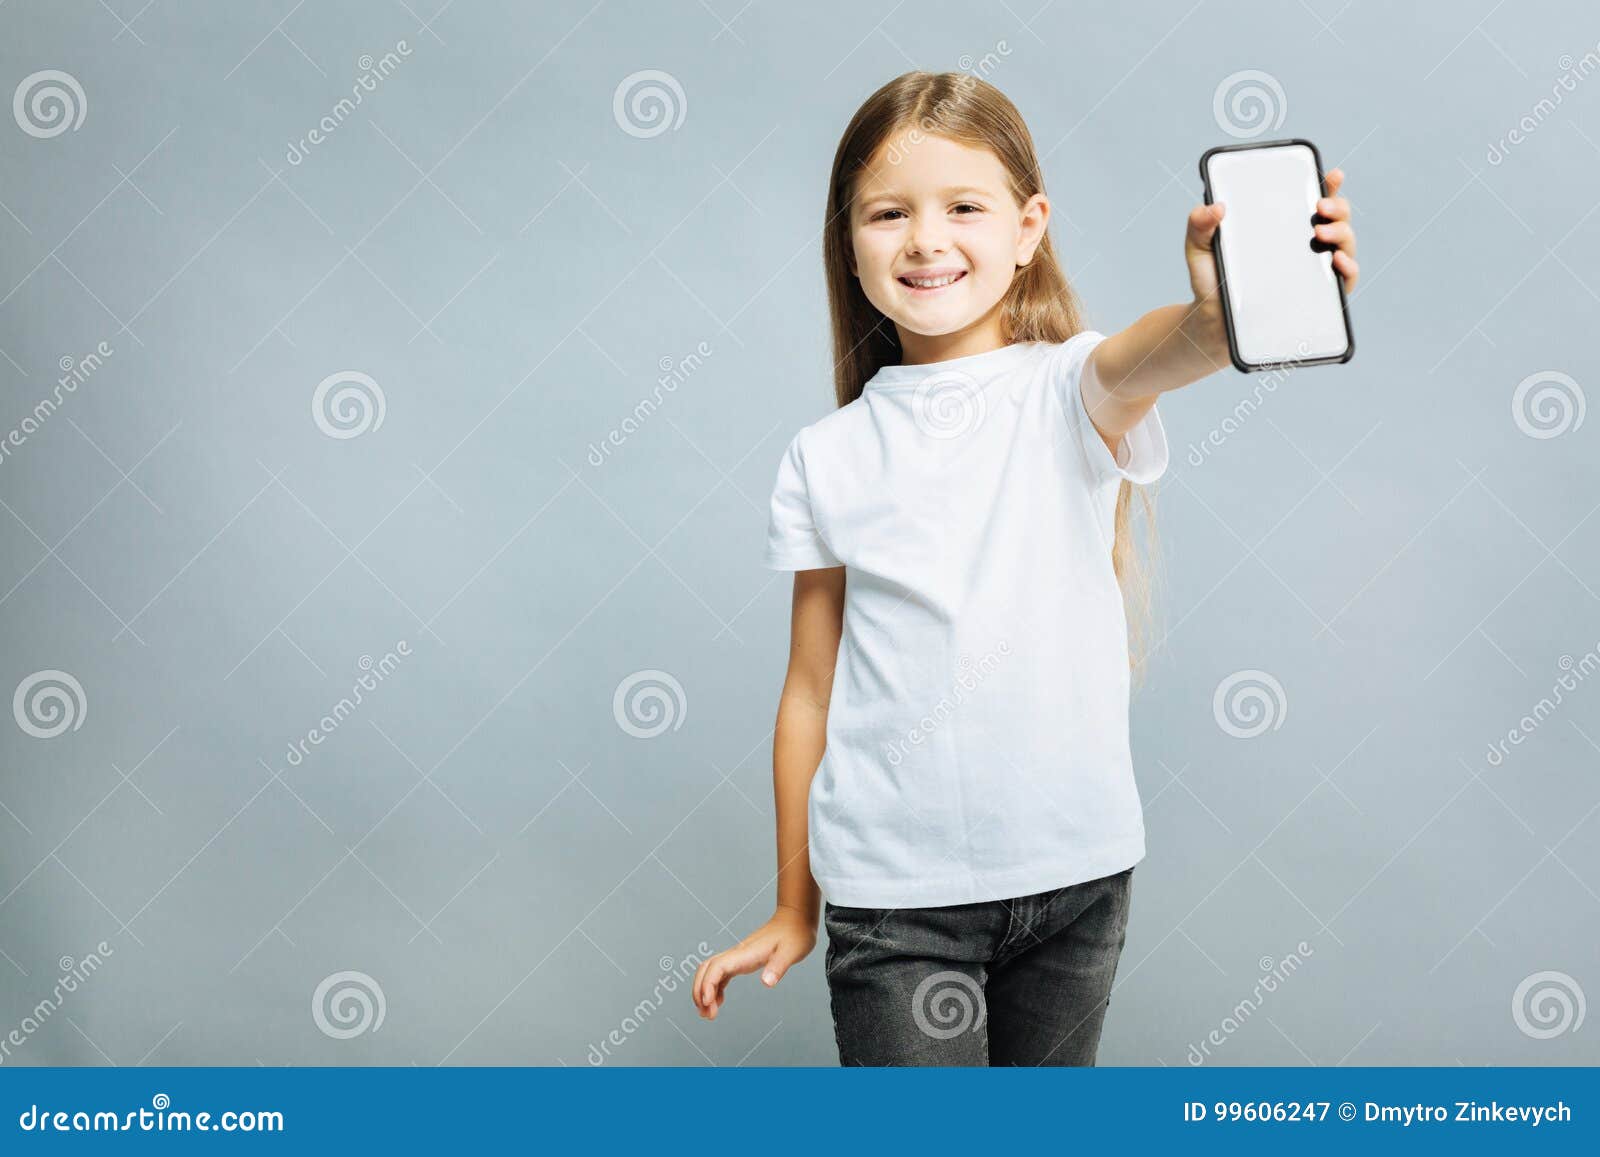 Positive Girl Showing Her Mobile Phone Stock Image - Image of indoor ...